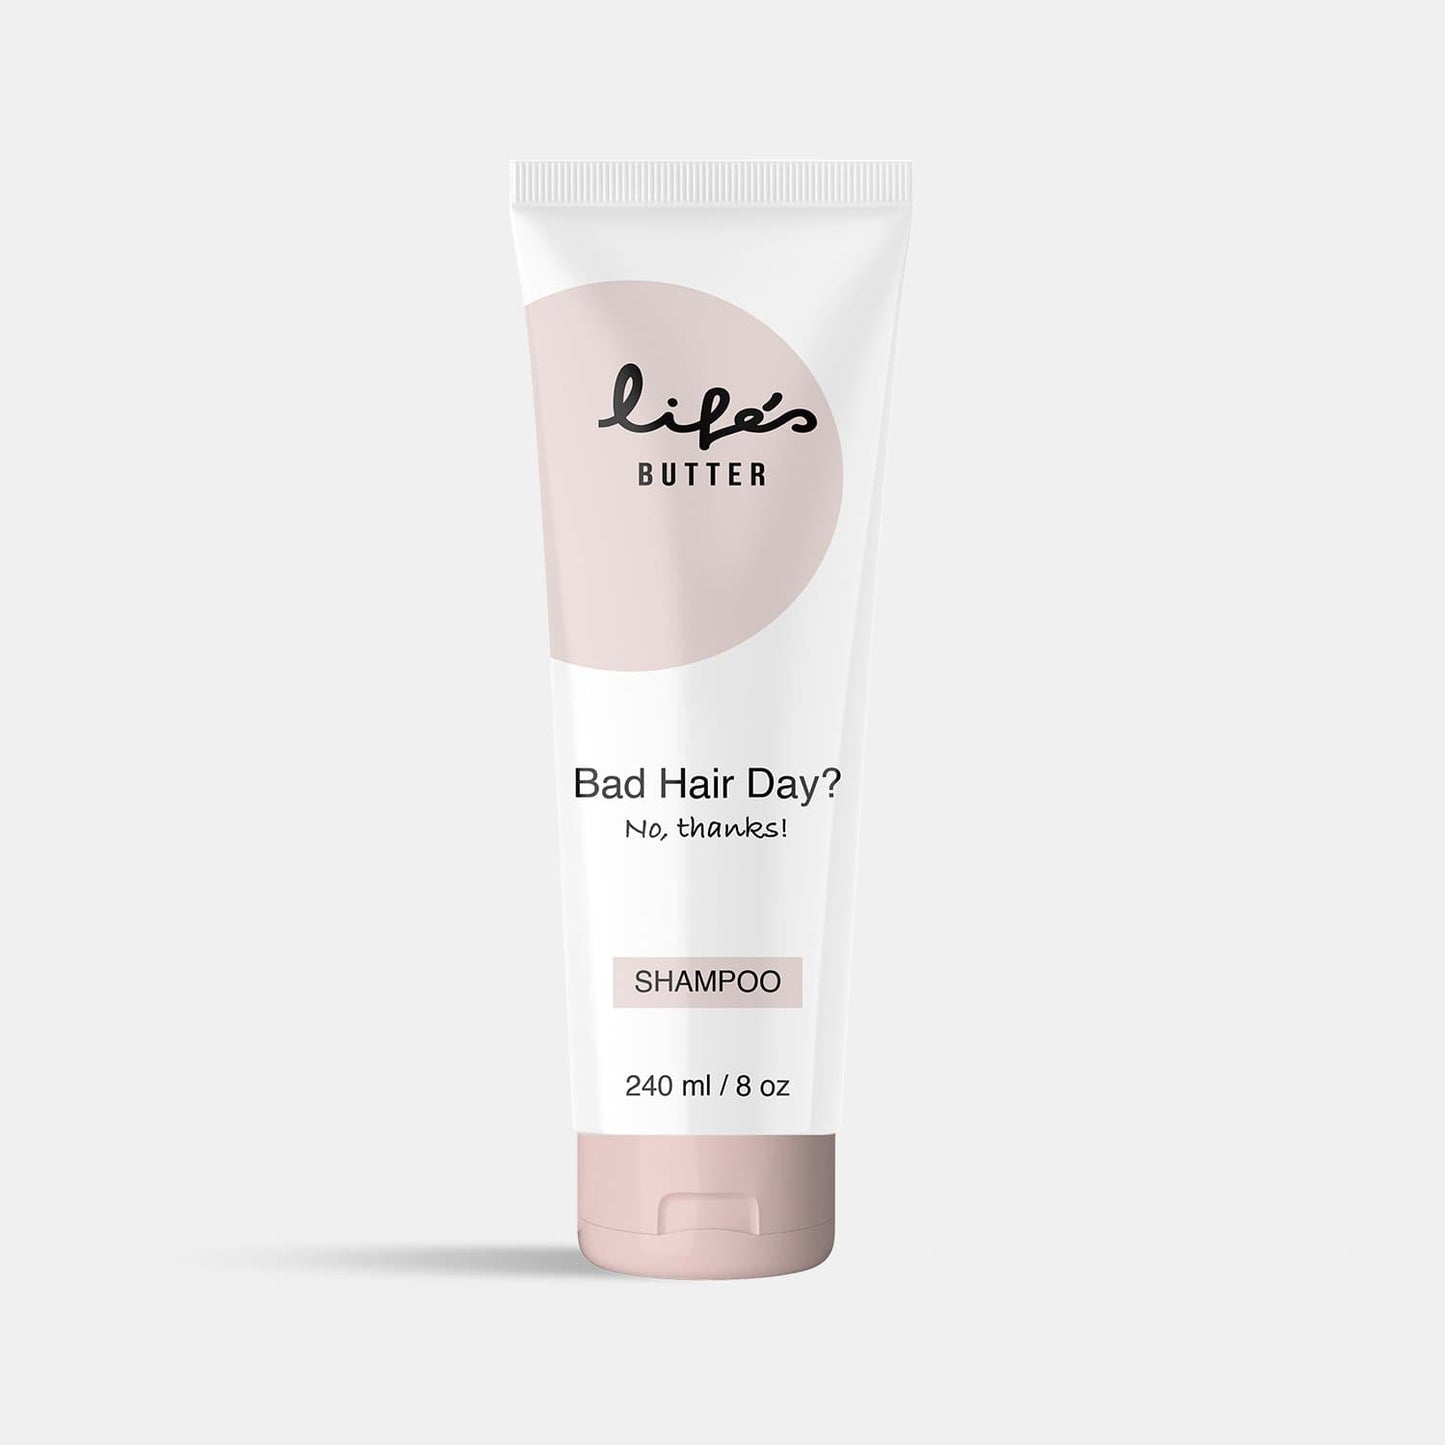 No Bad Hair Day Shampoo – Life's Butter